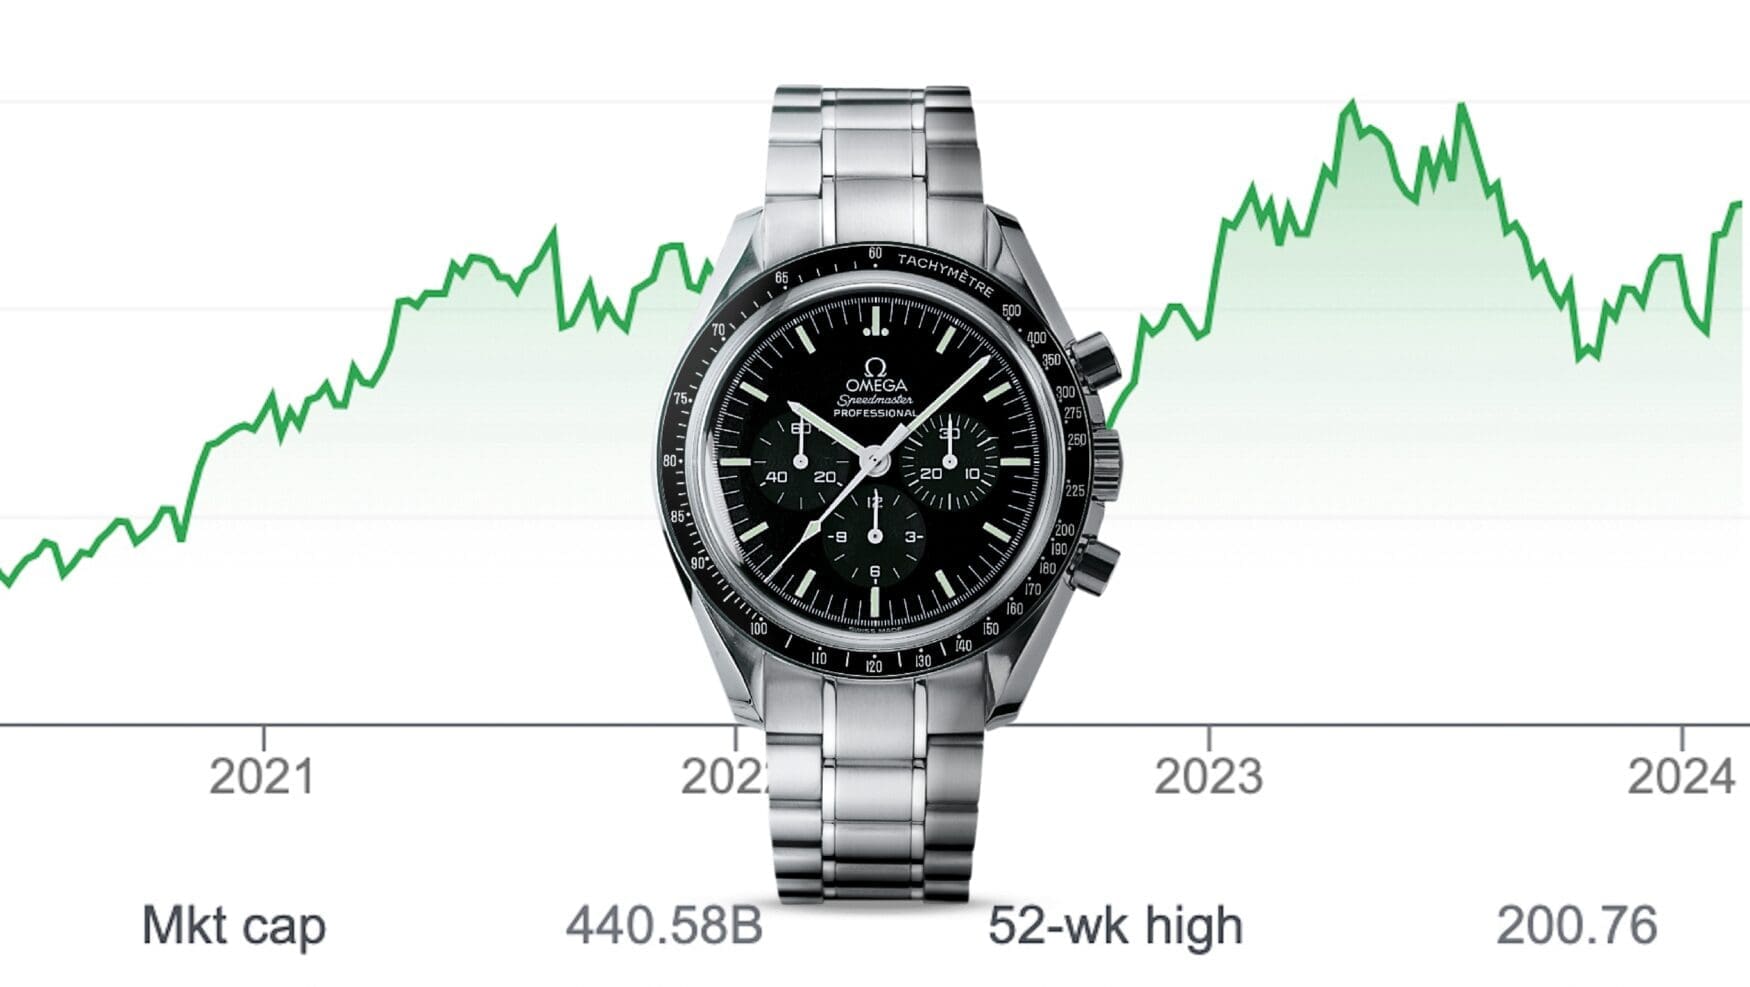 Big watch brands are among the ‘quiet luxury’ stocks moving into investor’s portfolios